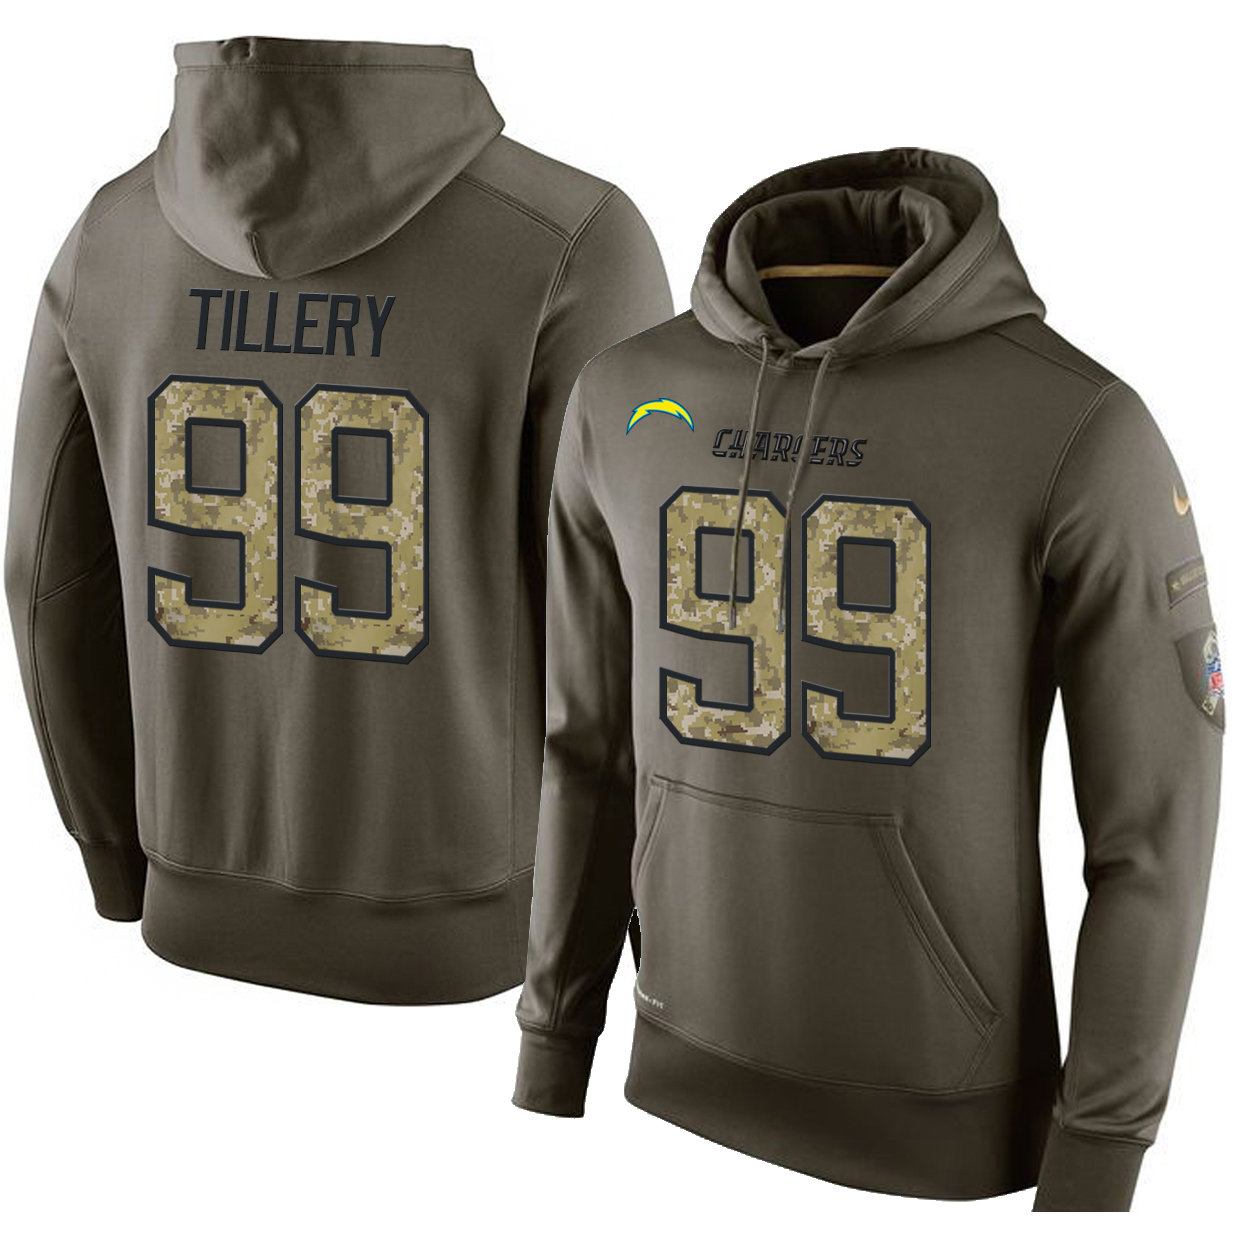 Football Men's Los Angeles Chargers #99 Jerry Tillery Stitched Green Olive Salute To Service KO Performance Hoodie